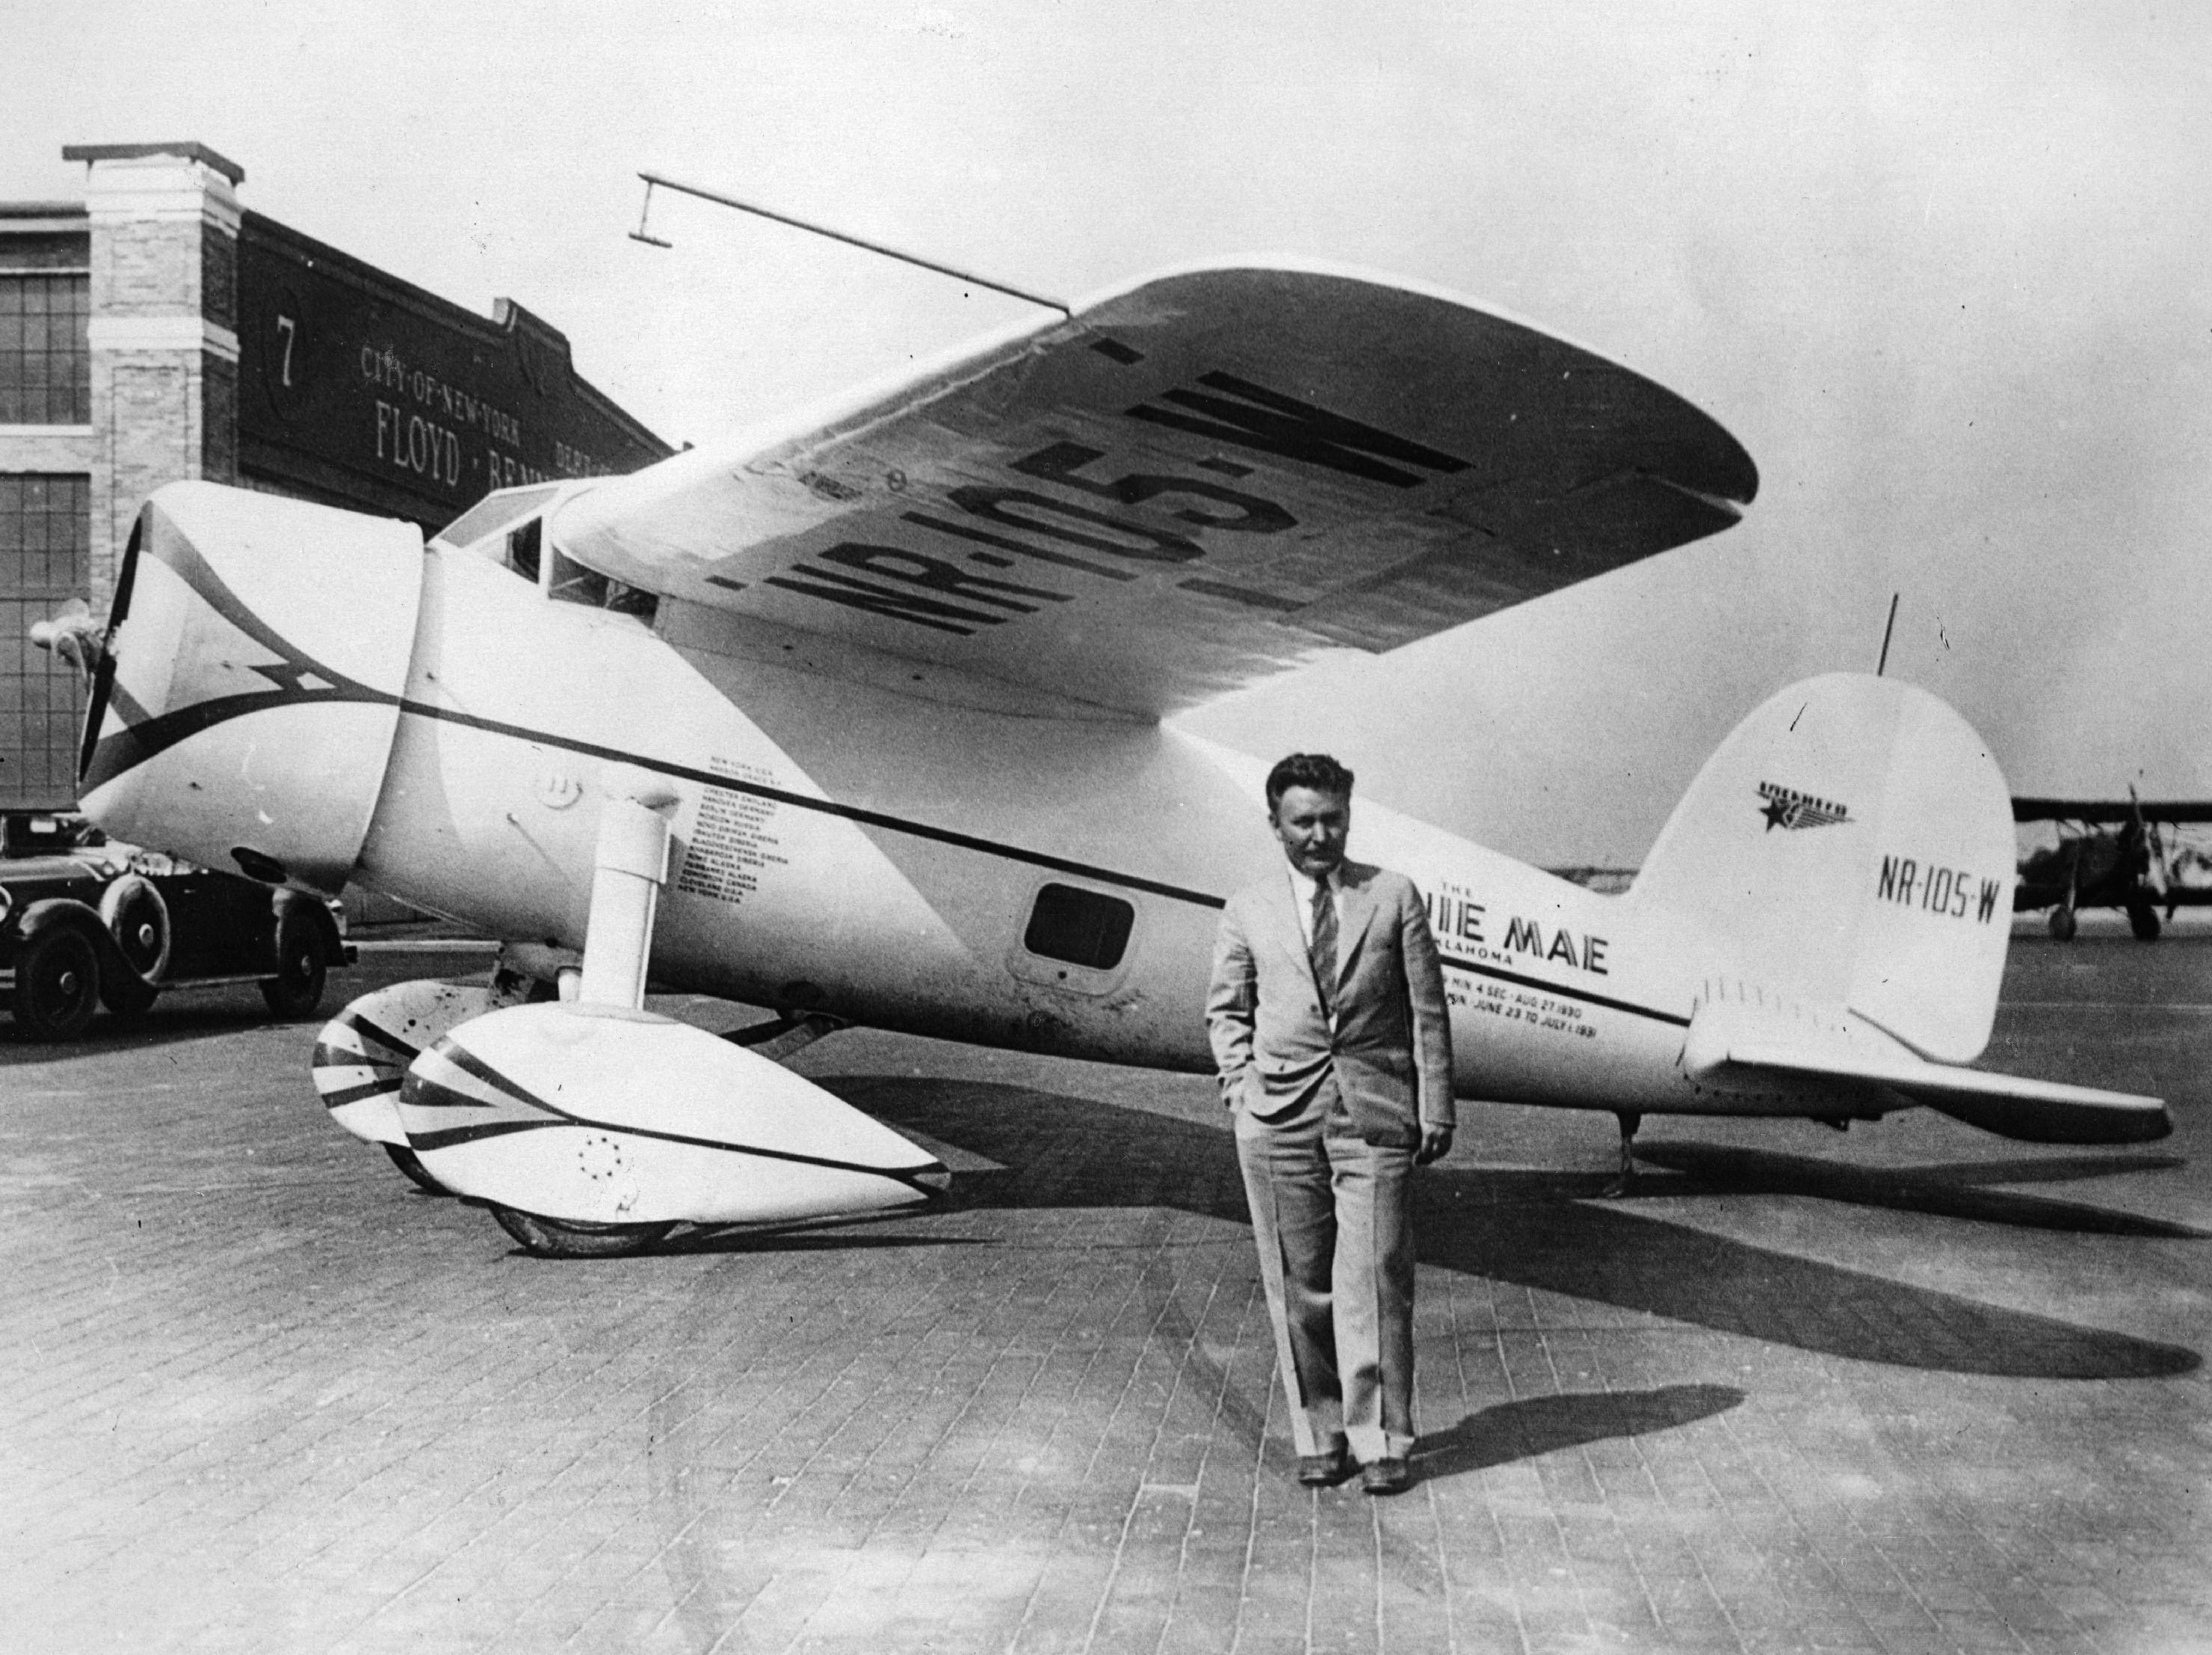  Post in front of the aircraft 'Winnie Mae'